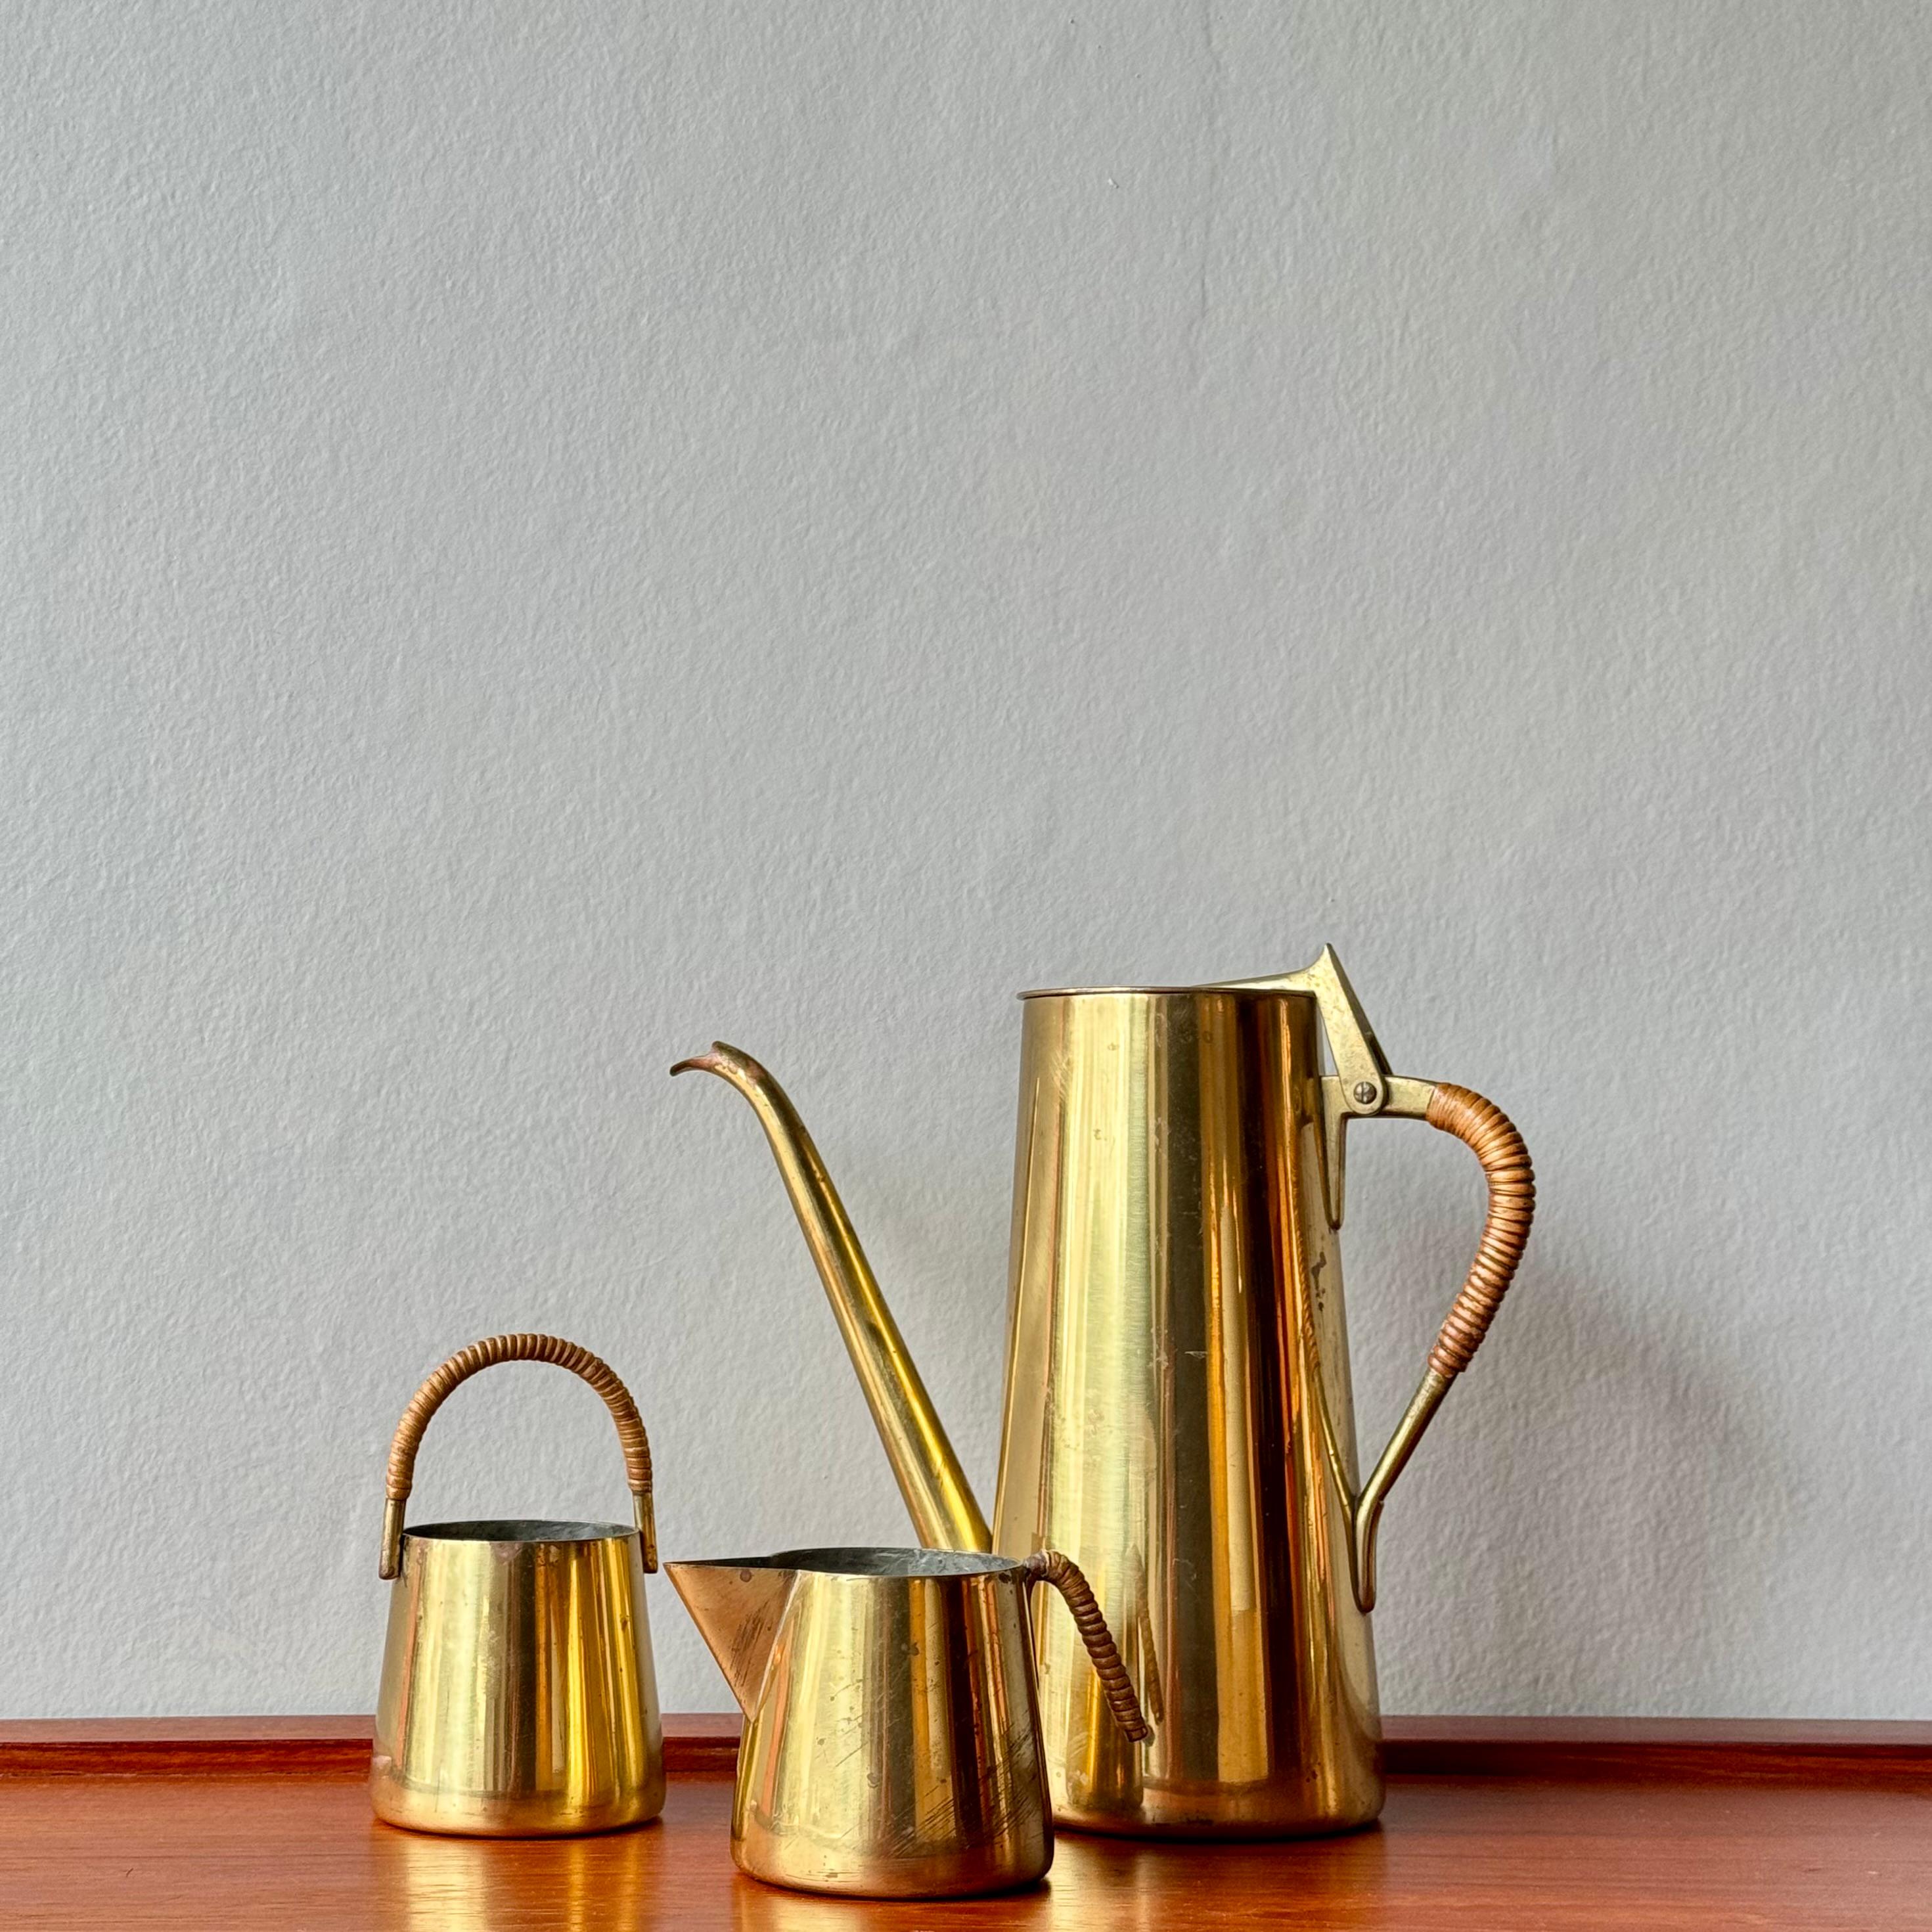 A three-piece brass coffee service with cane-wrapped handles, designed by Carl Auböck II during the 1950s. 

The contrast of cane wrapped handles with smooth brass is typical of the designs of Carl Auböck II during the 1950s. Both practical and